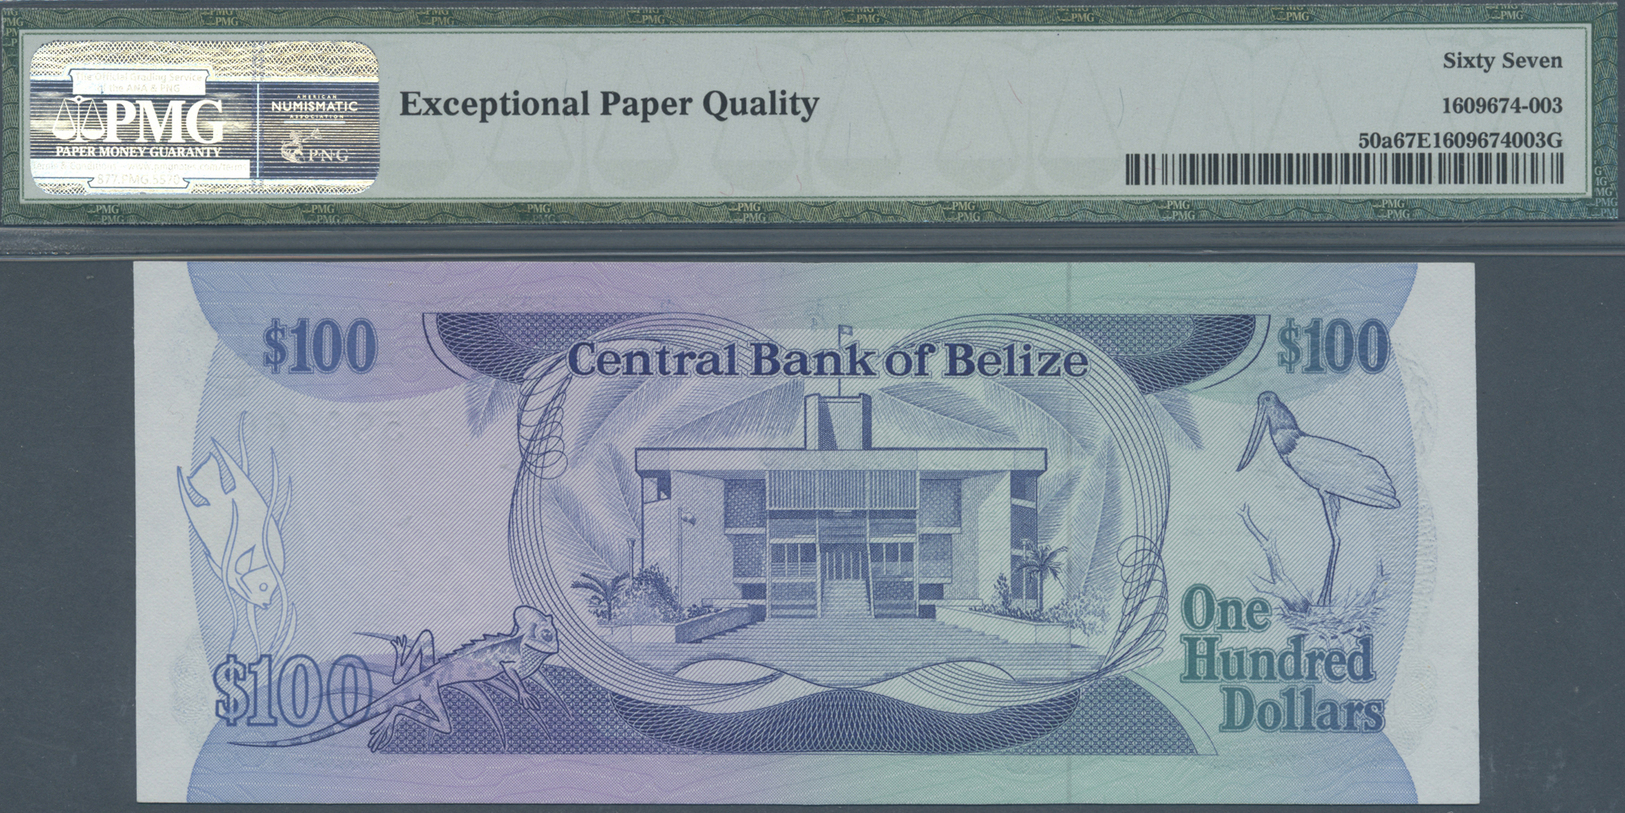 00292 Belize: 100 Dollars 1983, P.50a, Highly Rare Note In Perfect Condition, PMG Graded 67 Superb Gem Unc - Belize